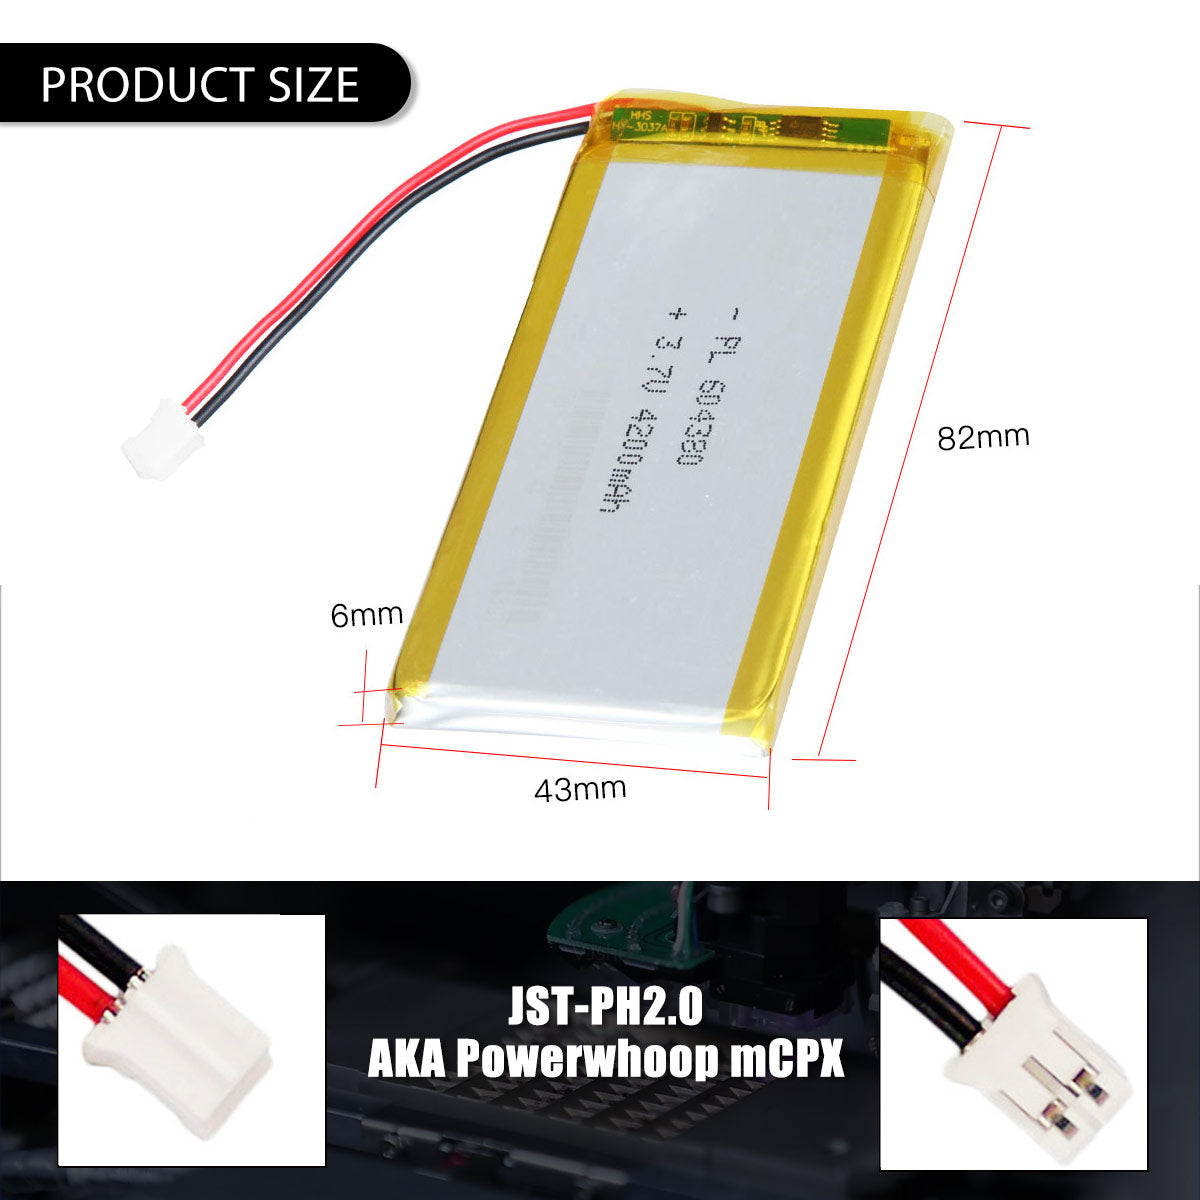 YDL 3.7V 4200mAh 604380 Rechargeable Lithium Polymer Battery